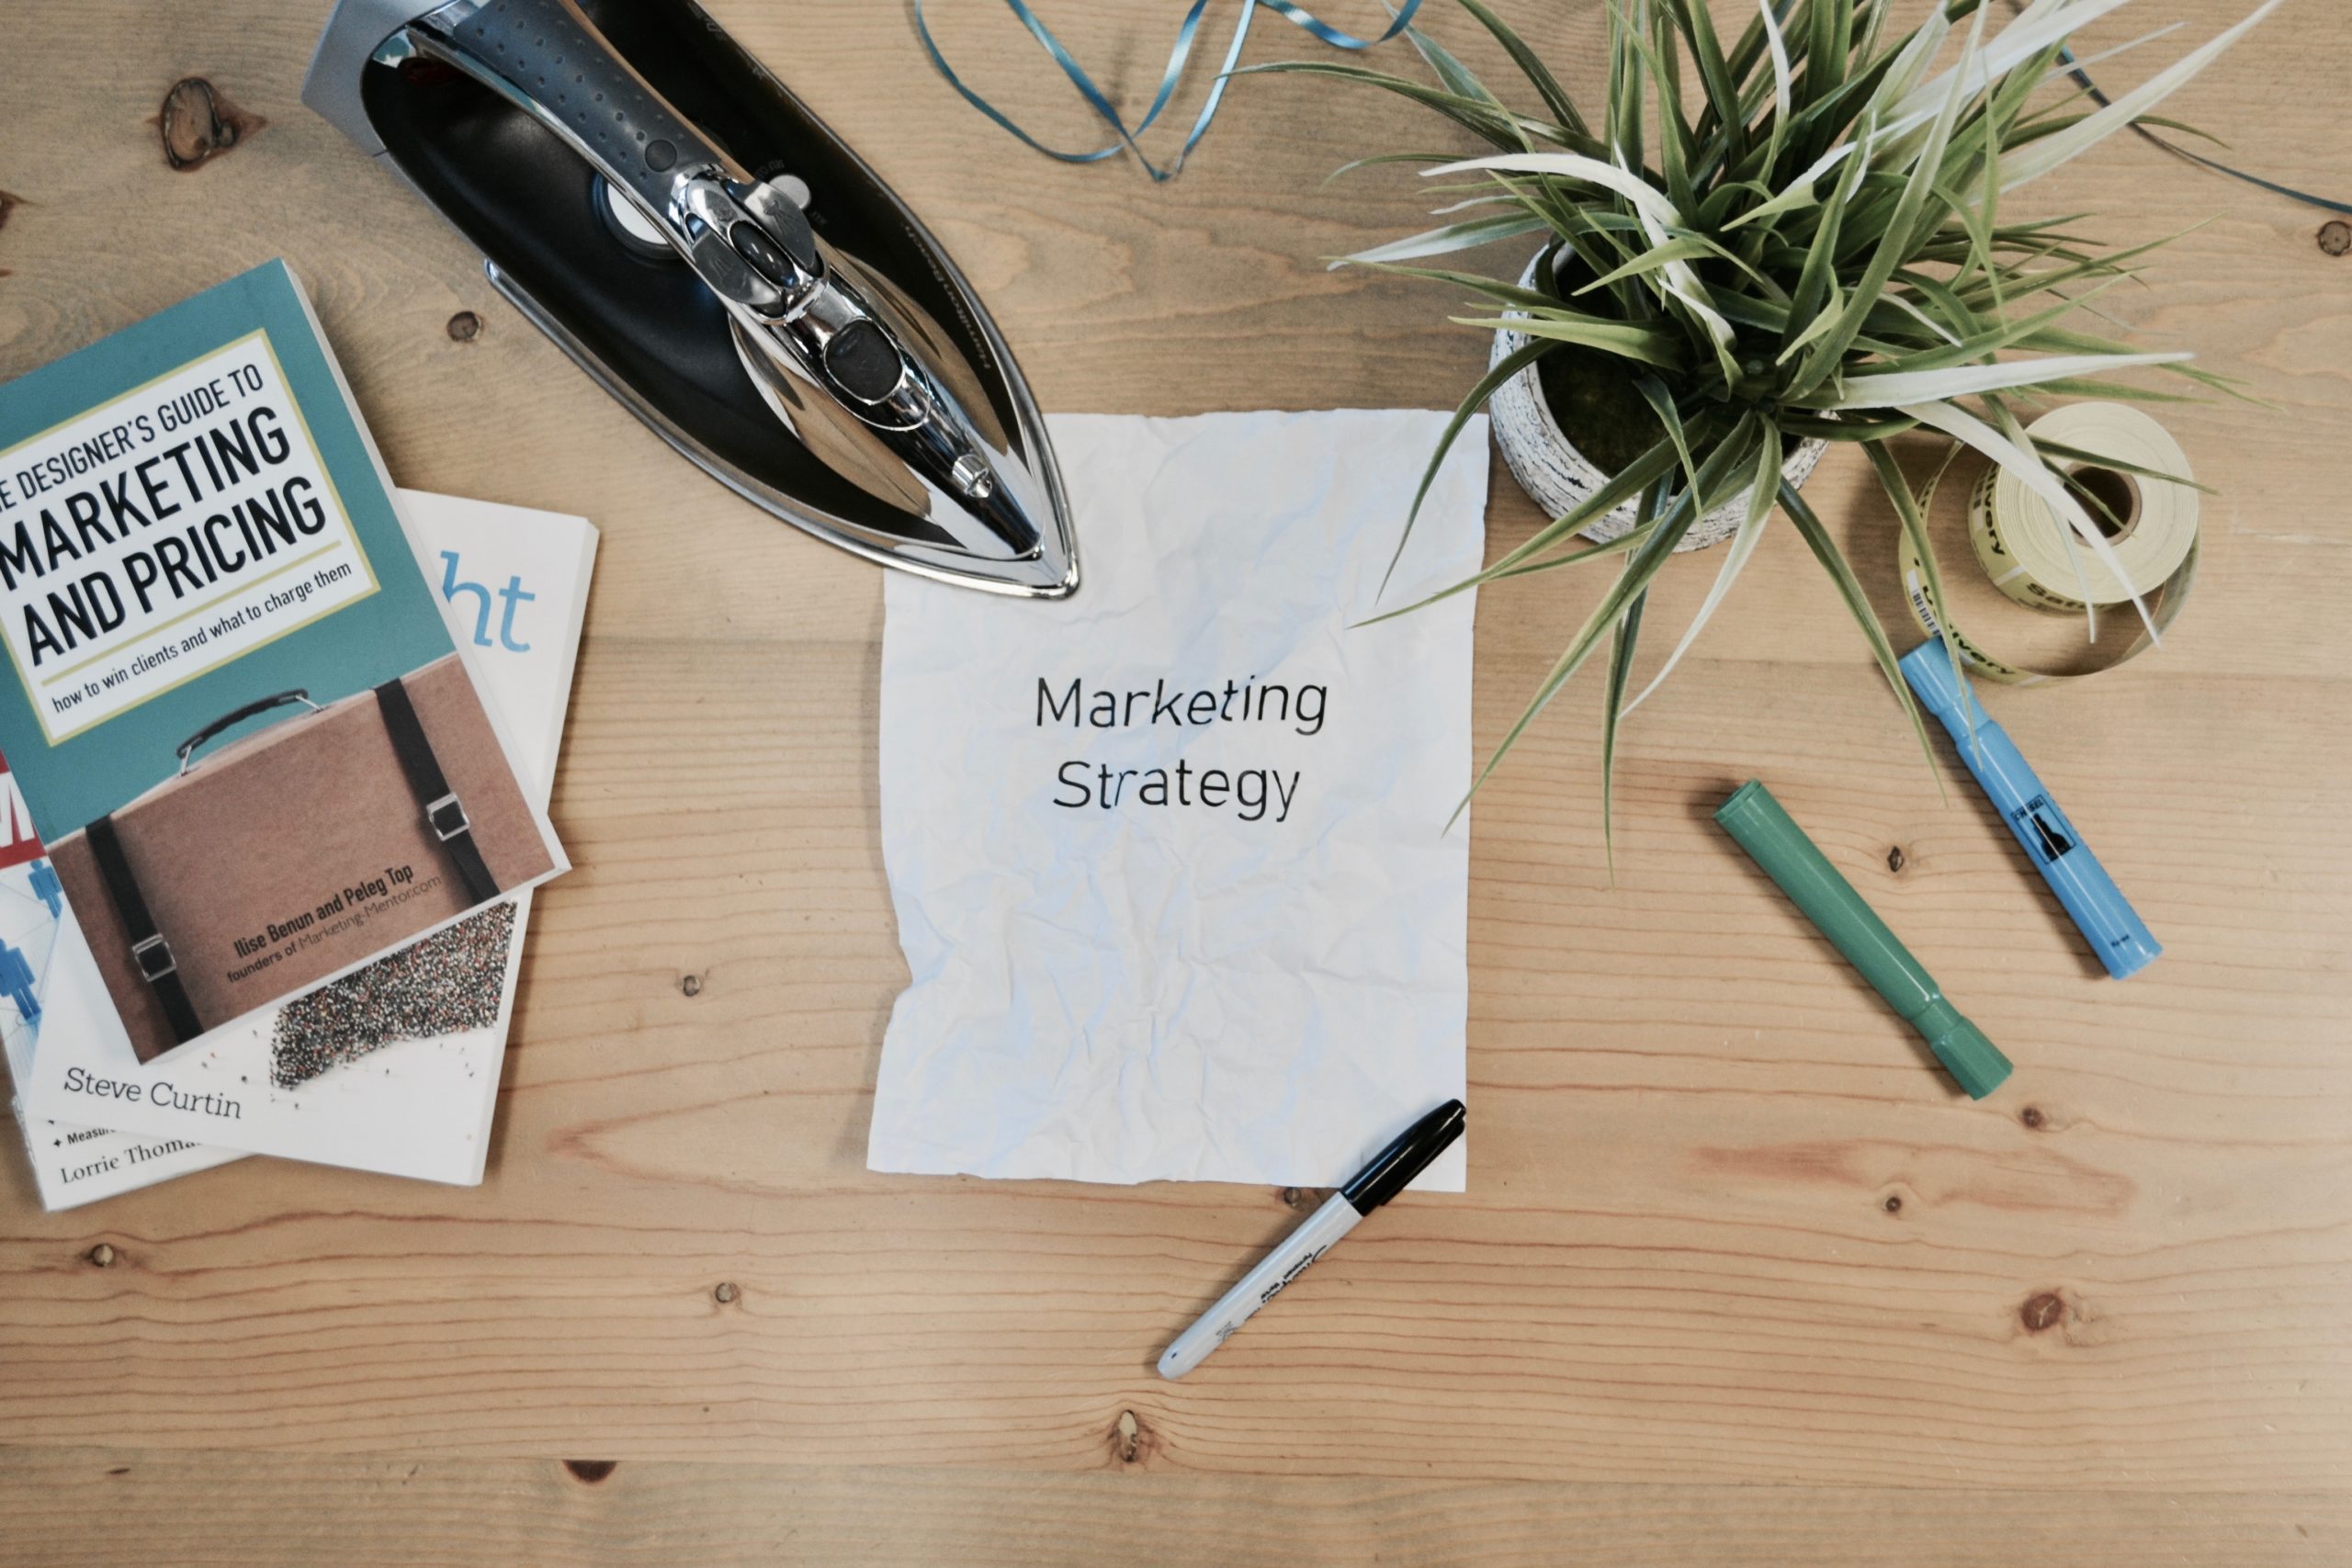 The words “marketing strategies” shown written on a piece of paper.